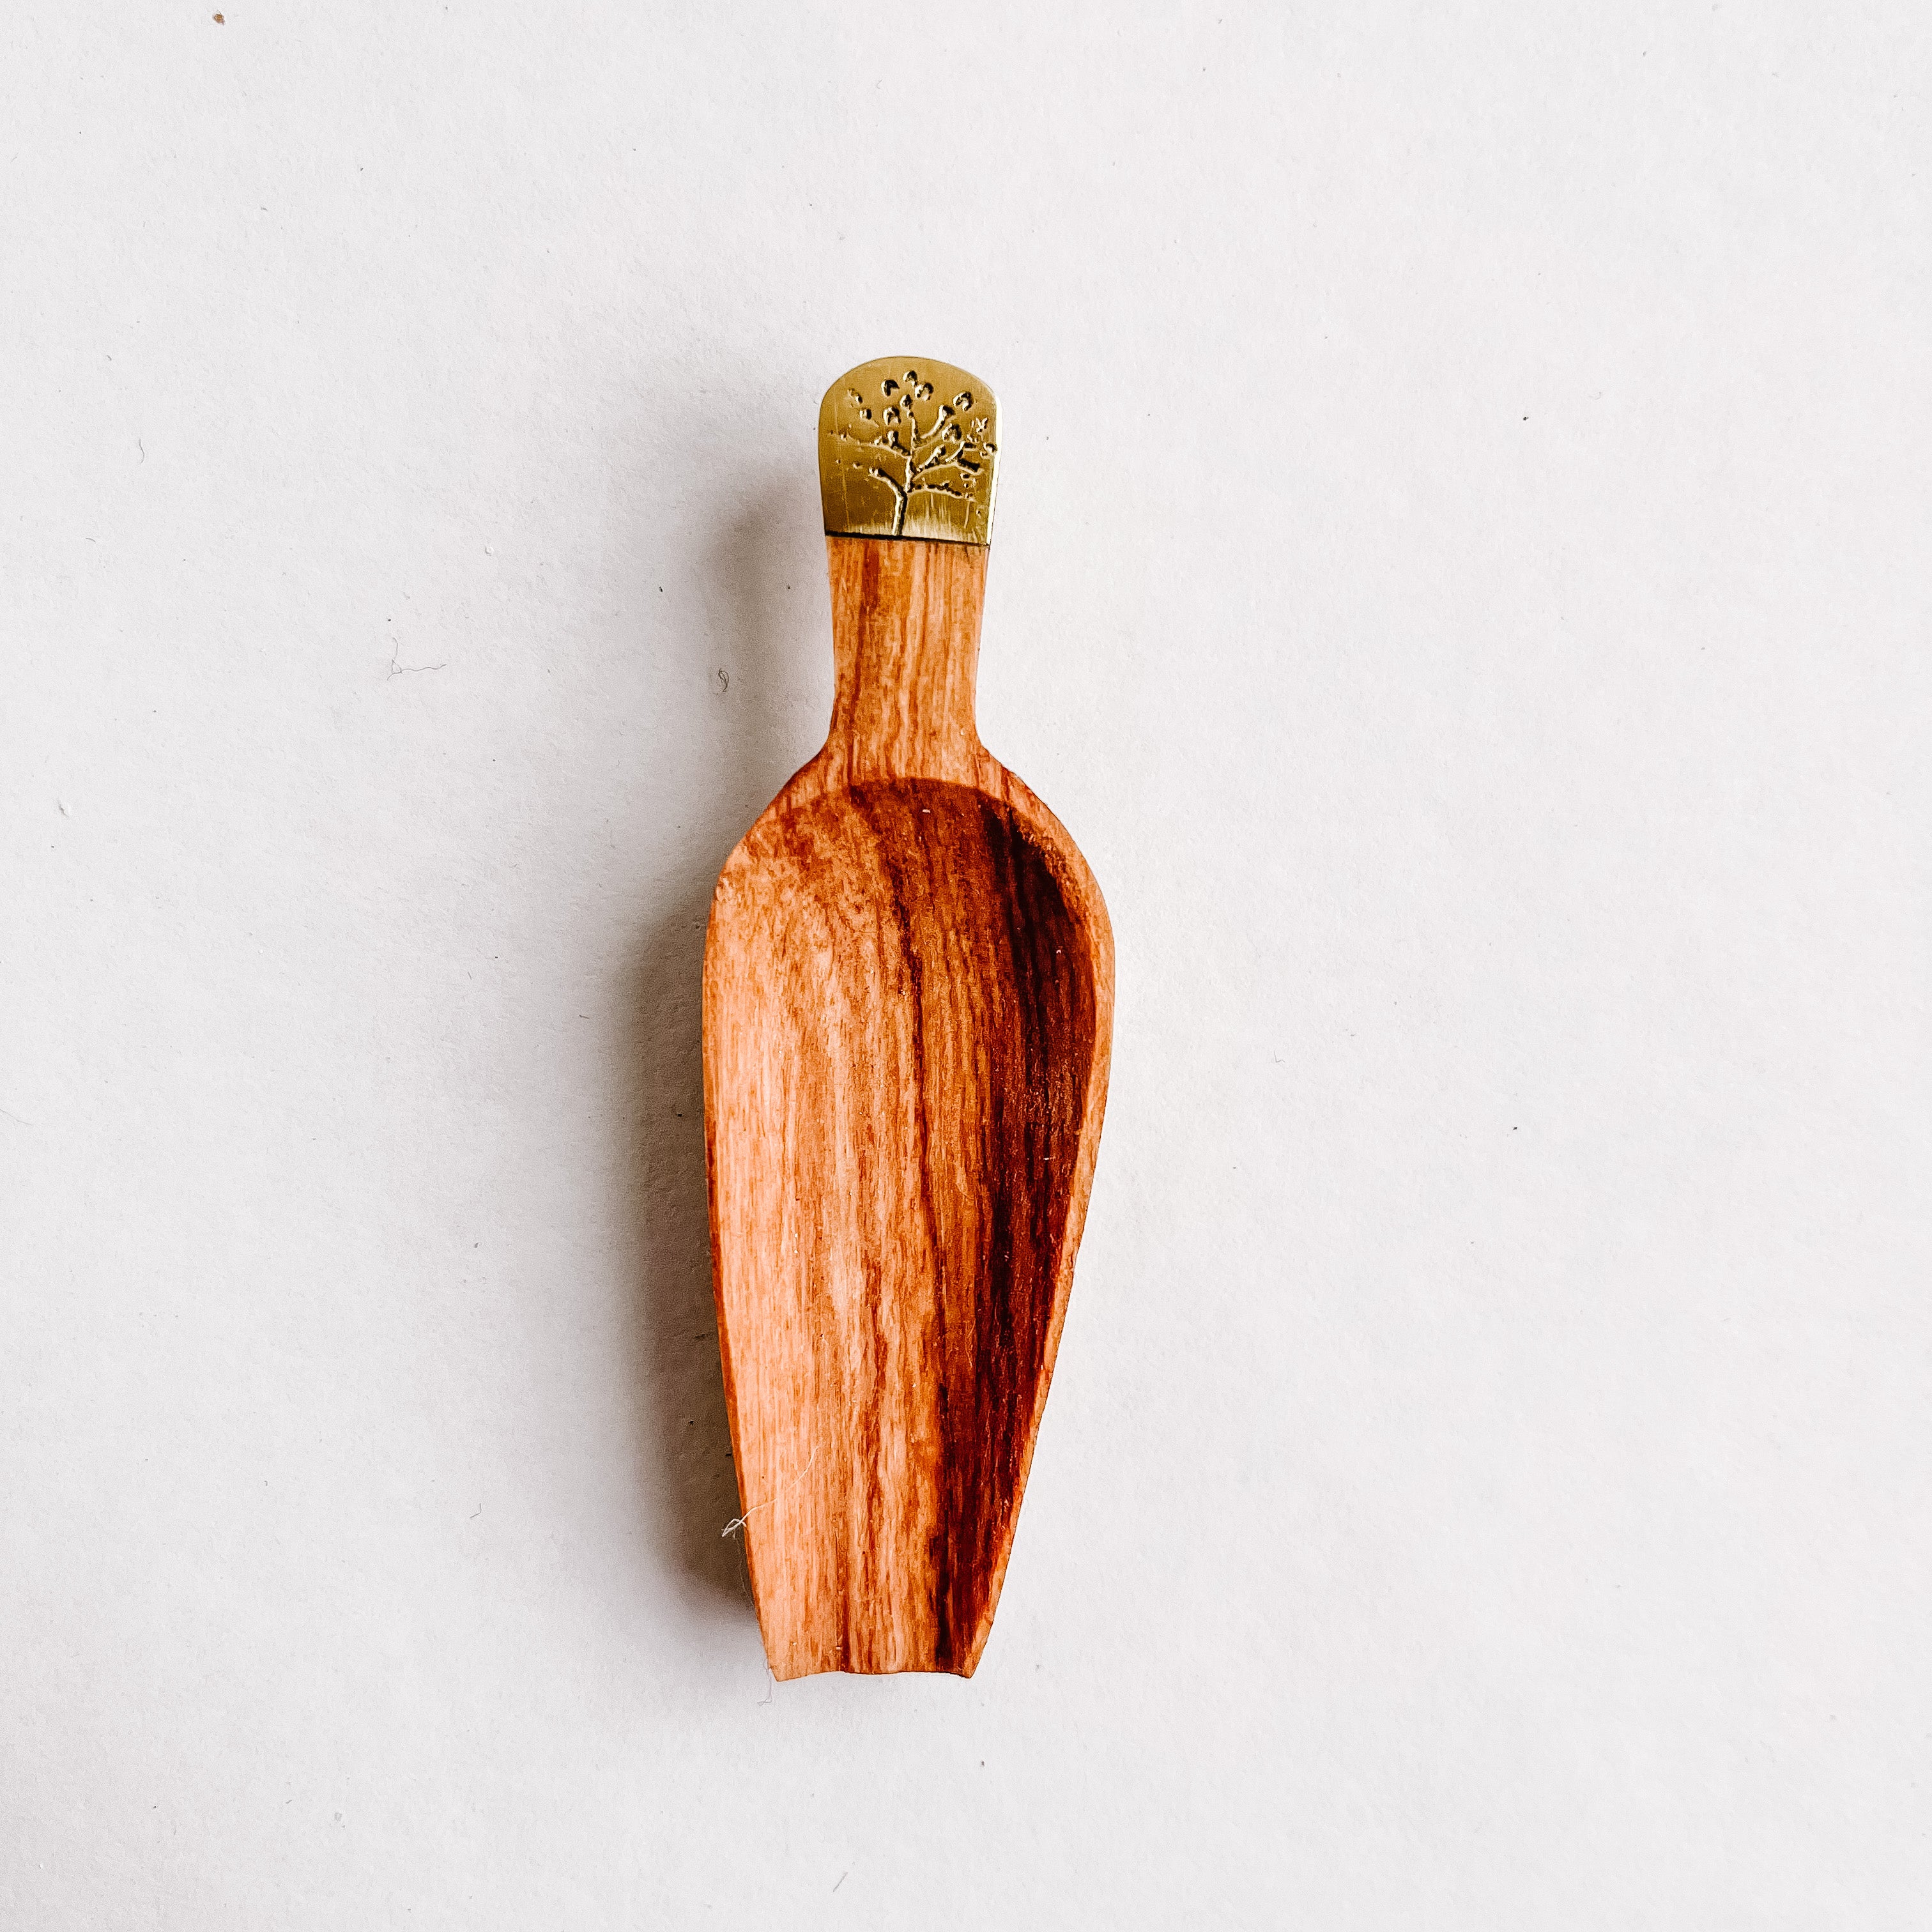 JustOne's four inch wooden scoop with a tree engraved recycled brass handle, handcrafted in Kenya